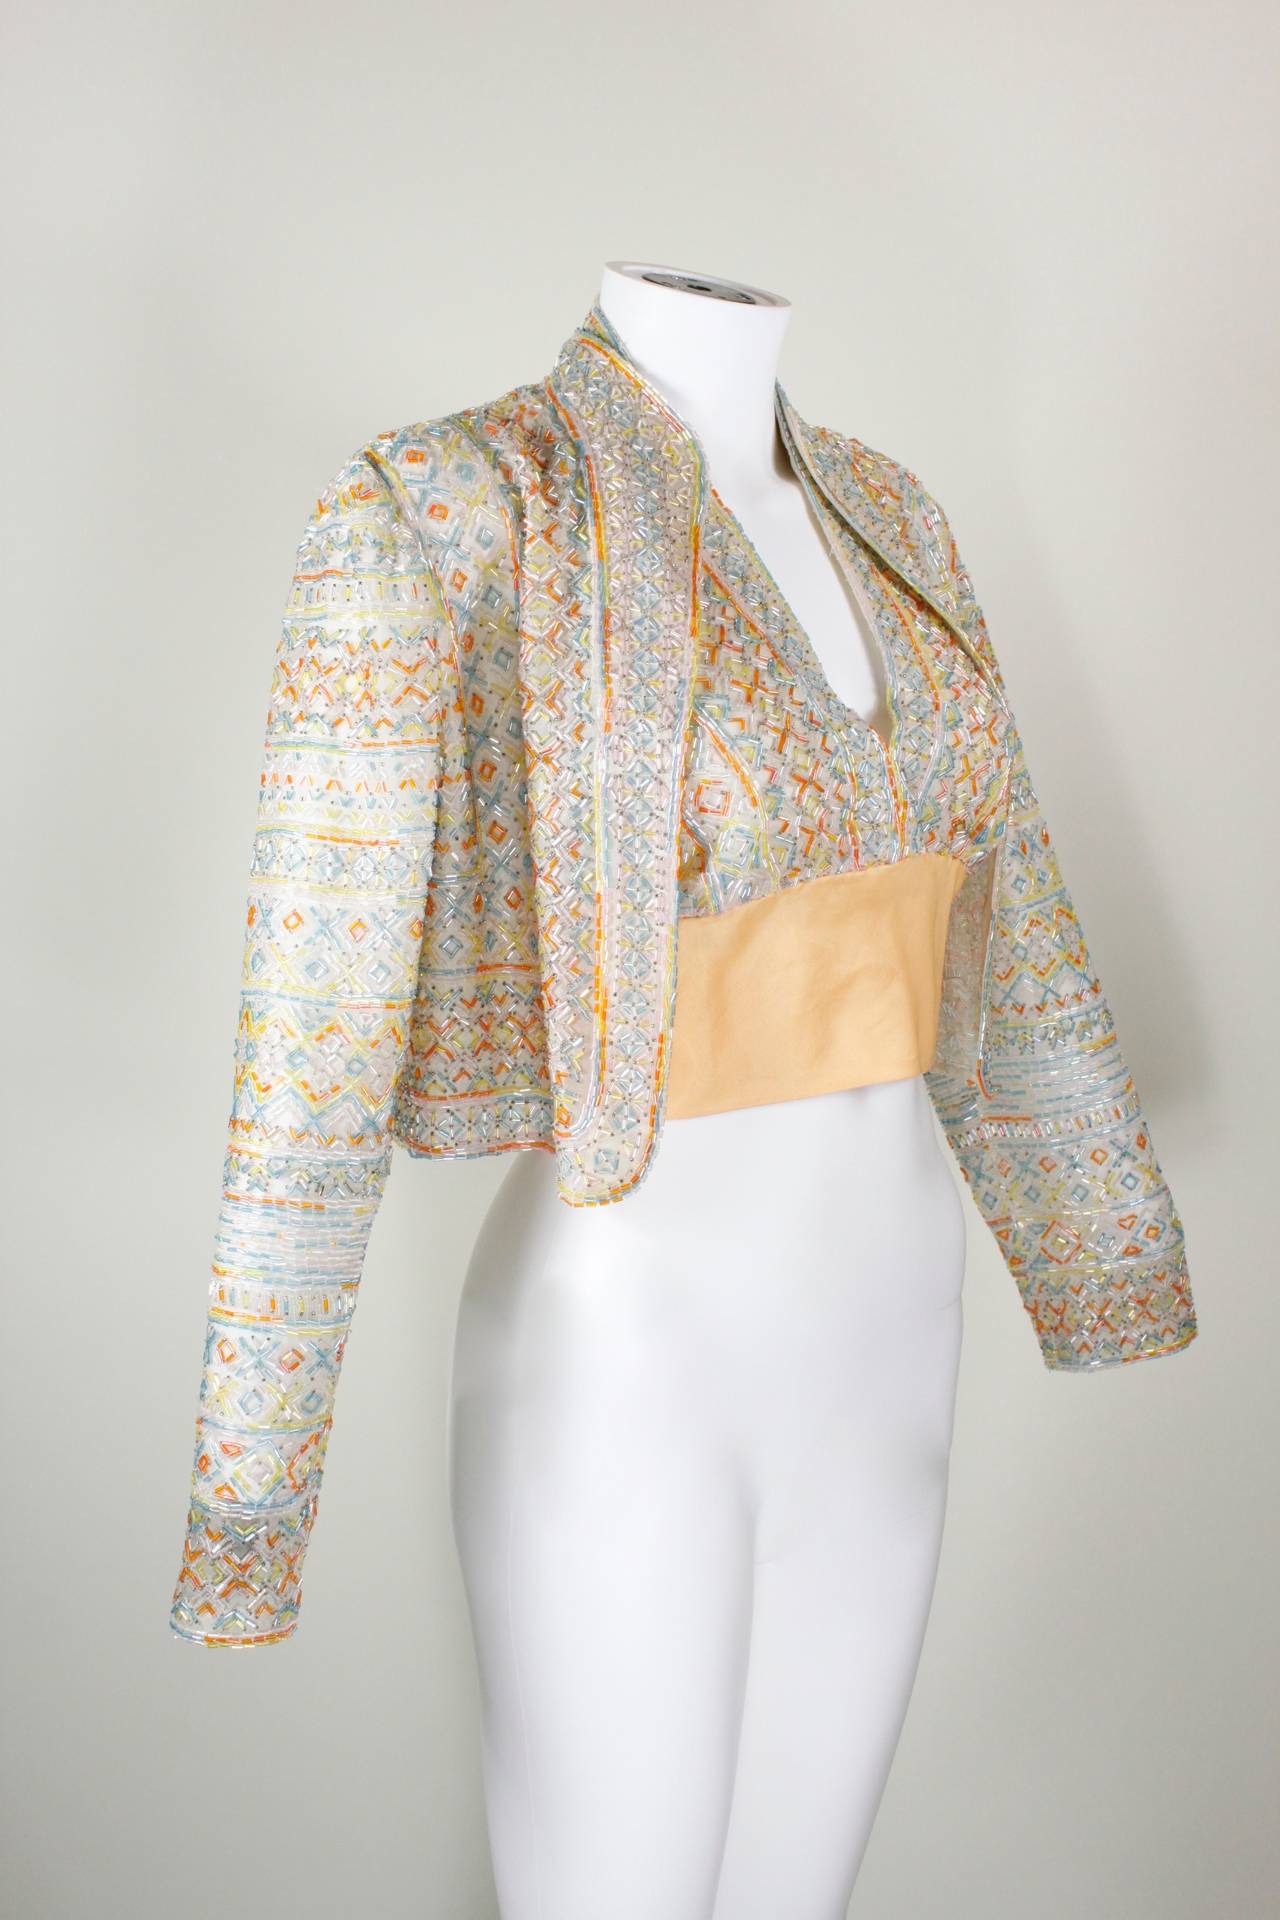 A gorgeous halter top and jacket ensemble, likely Halston. Vibrant orange, yellow, blue, light pink bugle beads are sewn onto cream organza. The halter top features a sherbert orange waist and tie in the back (please note, there is no tie or hooks